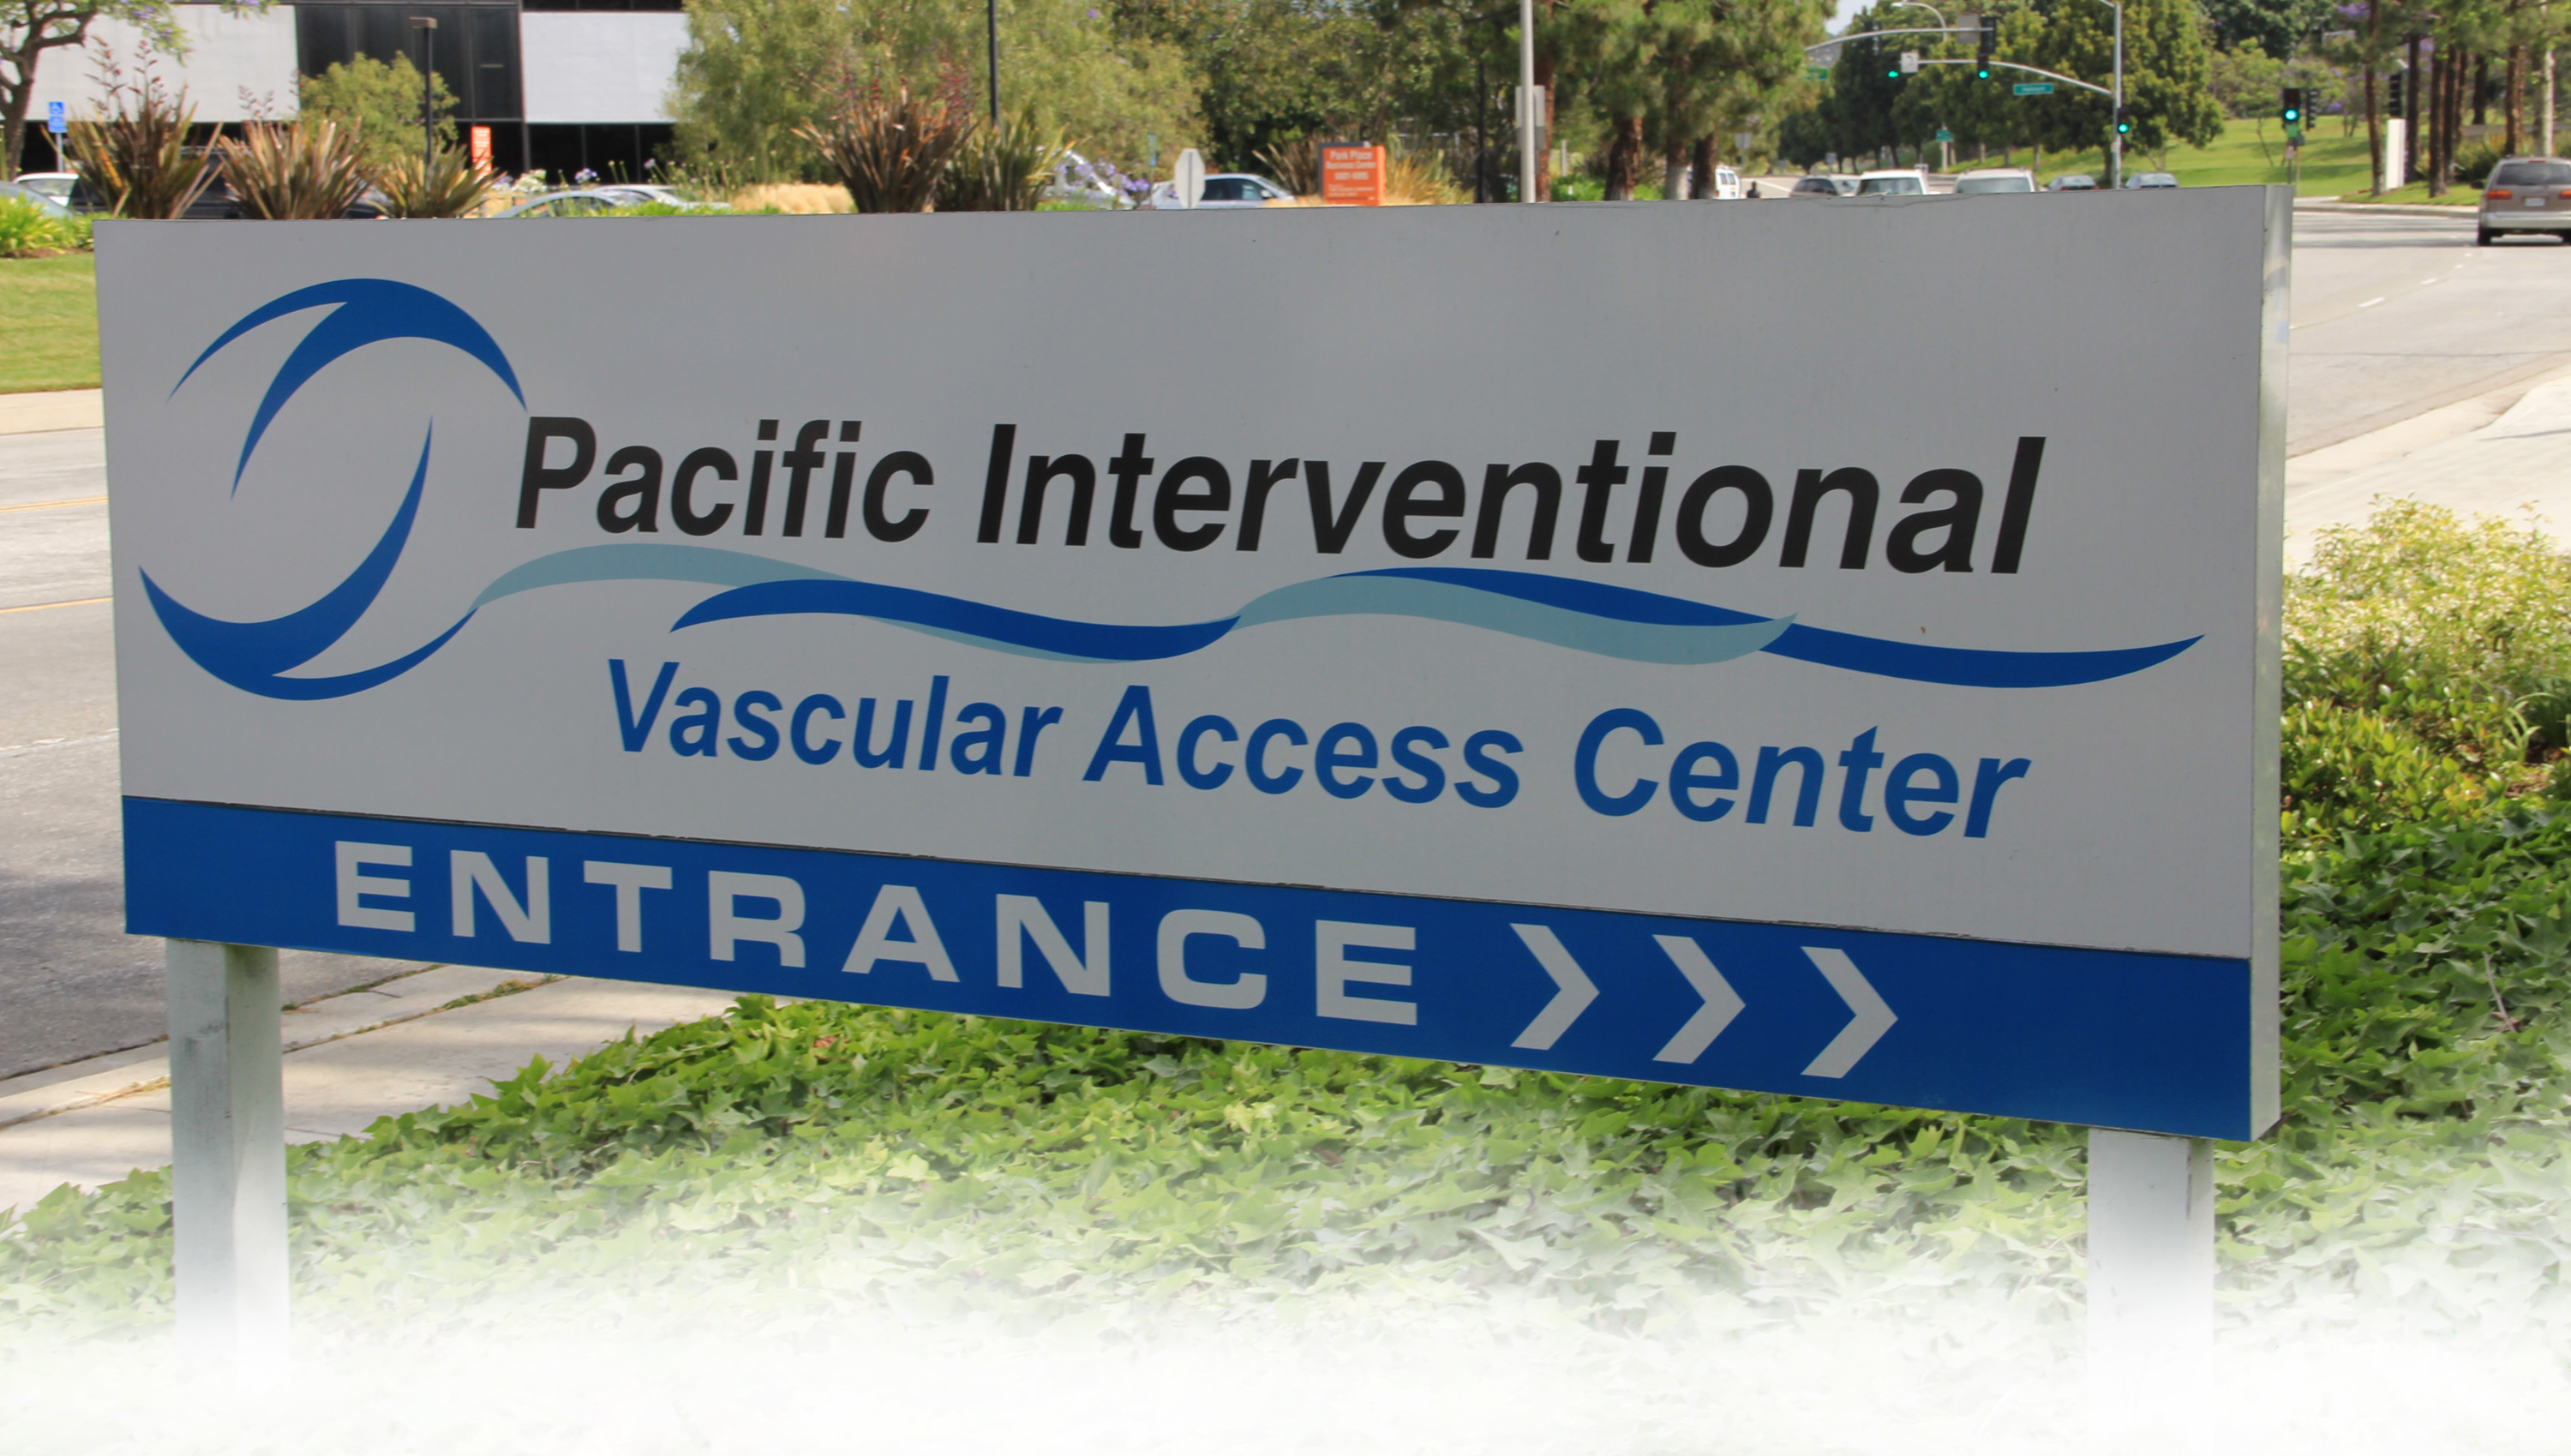 Pacific Interventional Vascular Access Center Photo